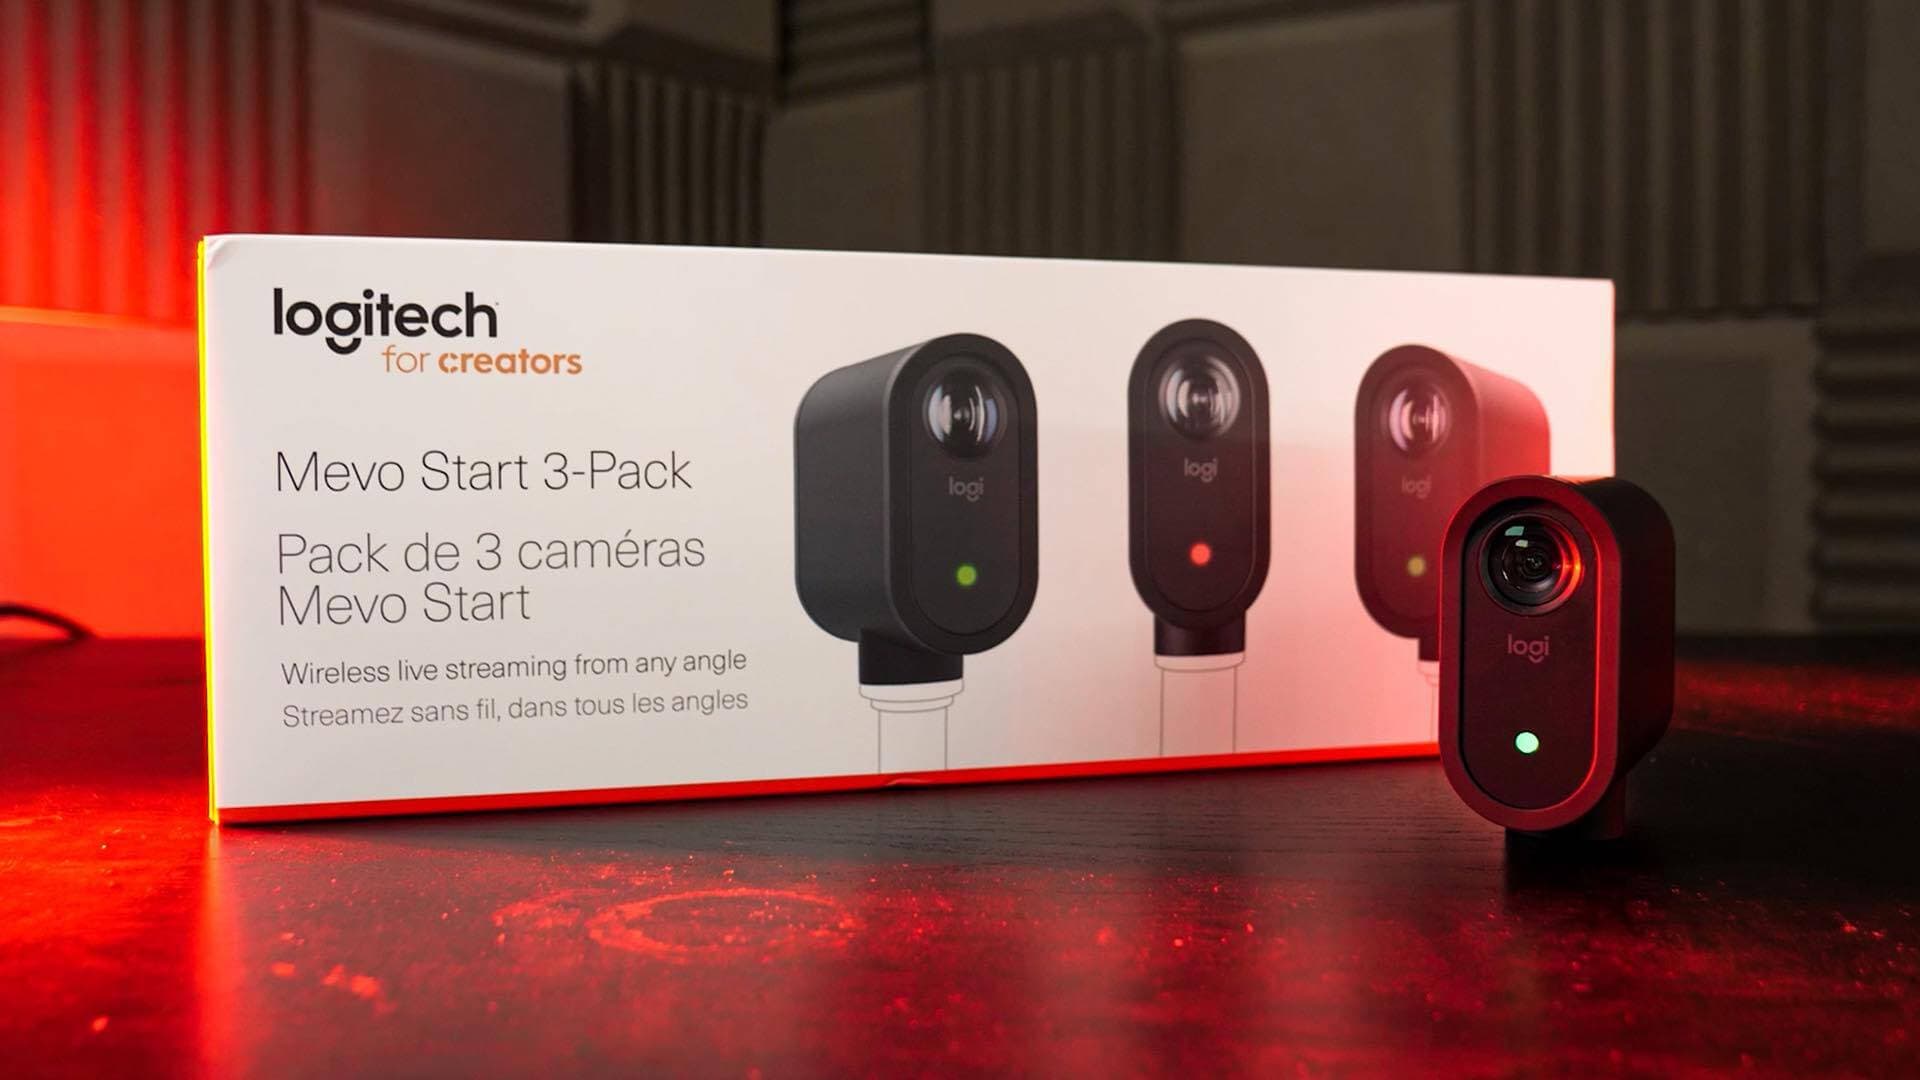 The Logitech Mevo Start-3 pack box on a table with one Mevo standing upright in front of the box.